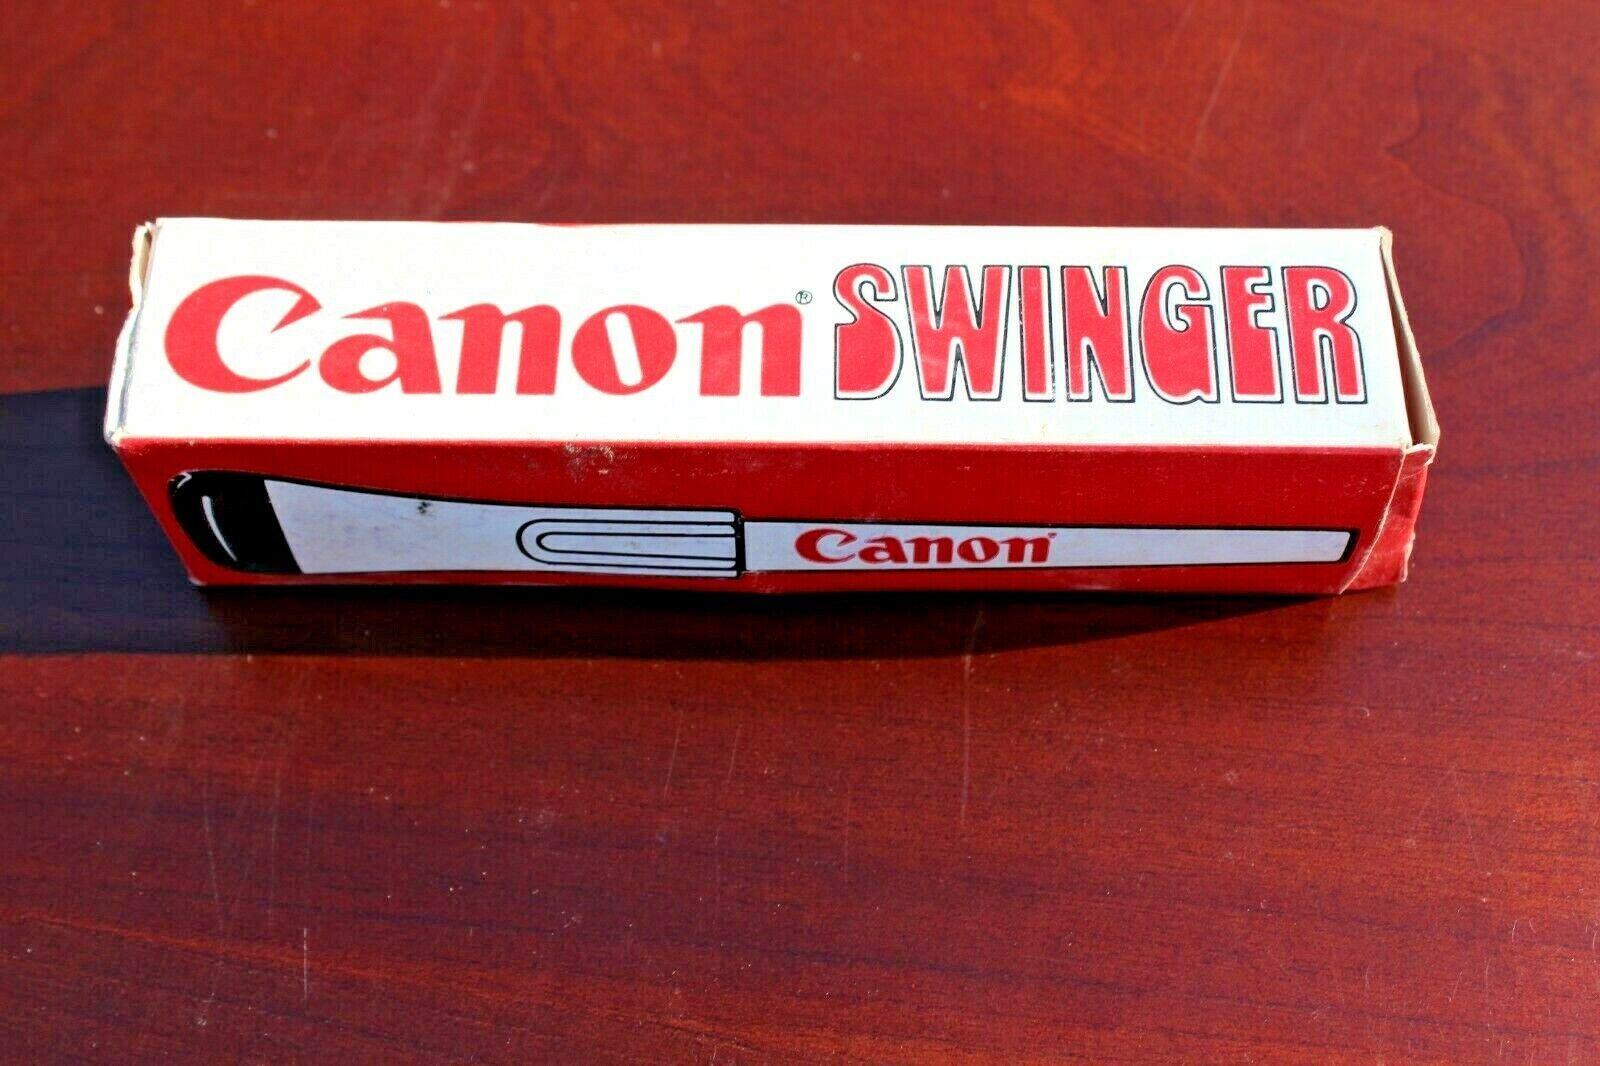 Canon Pen SWINGER  pen from the 1960's  new with box (parker?) - $47.50